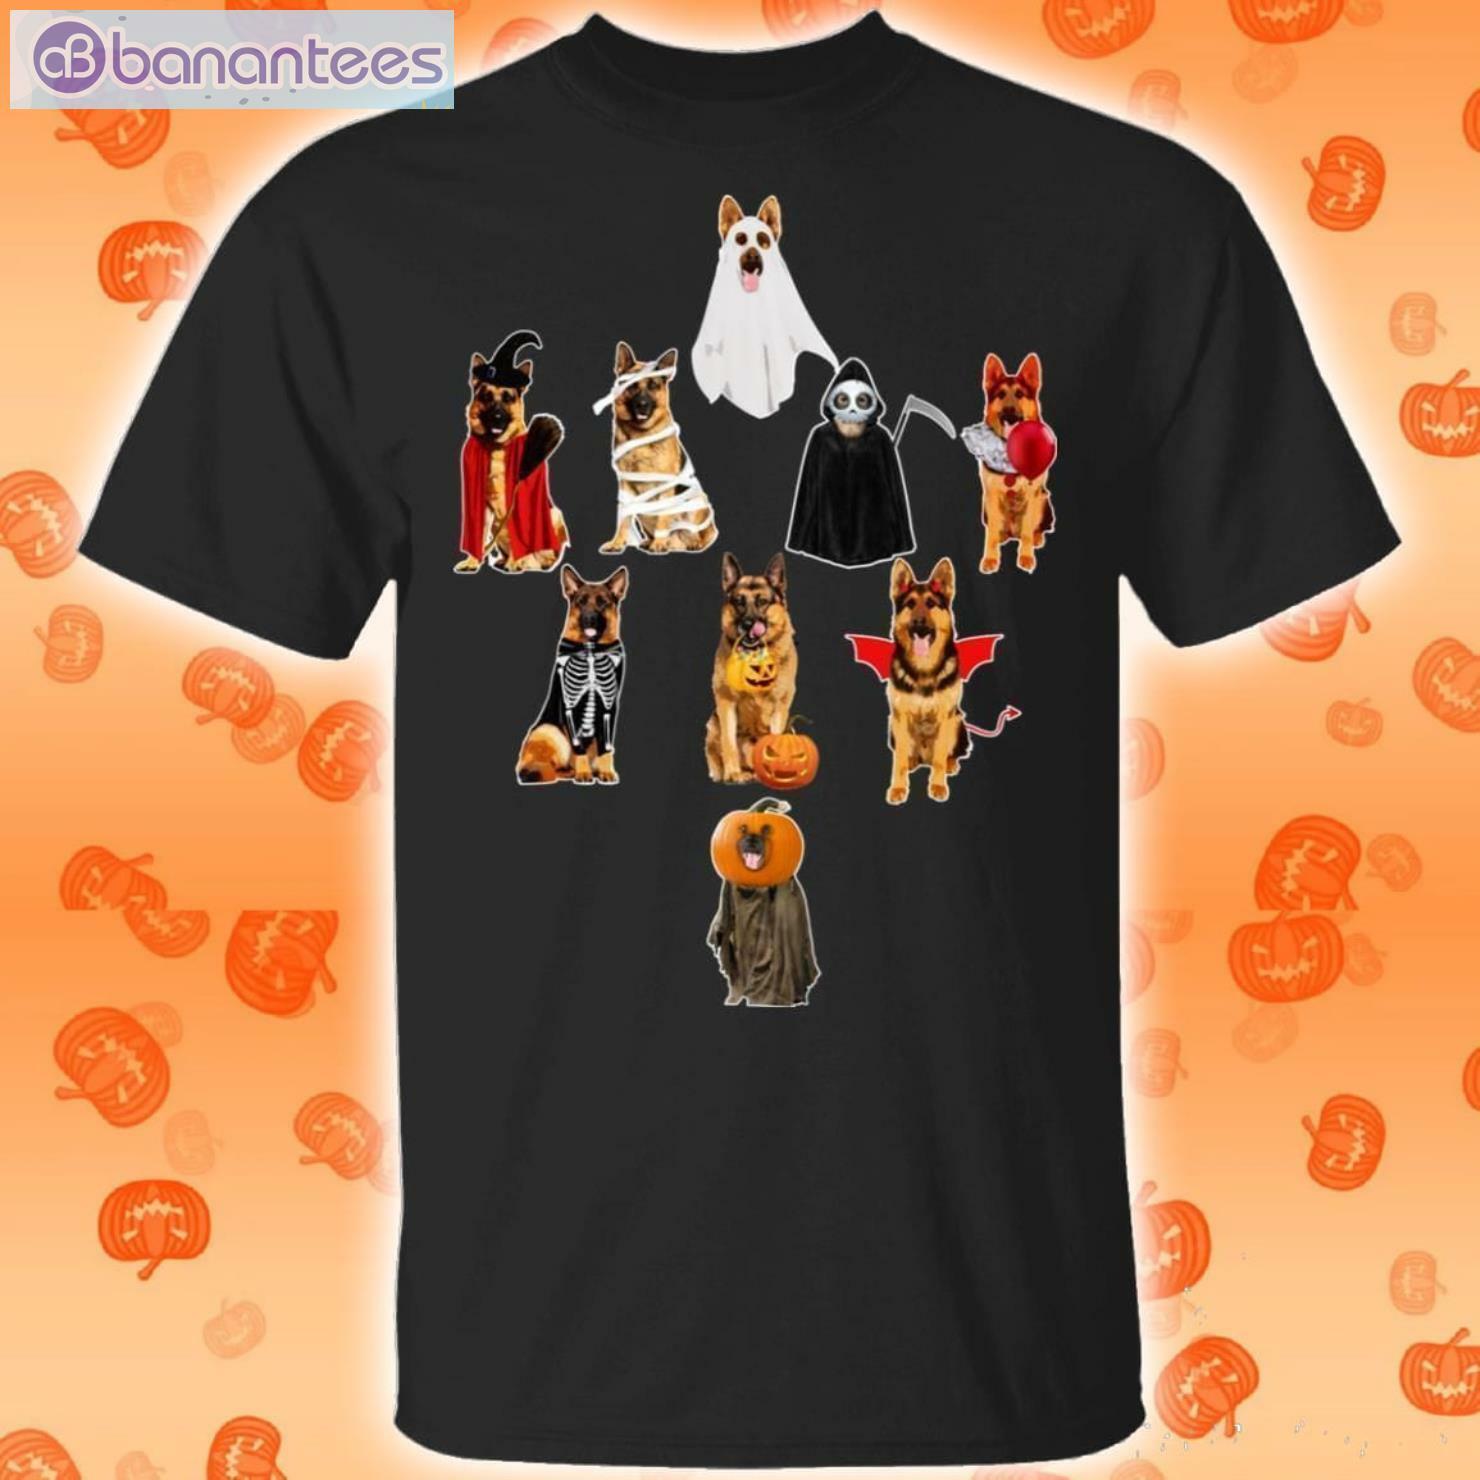 German Shepherds In Halloweens Funny T-Shirt Product Photo 1 Product photo 1